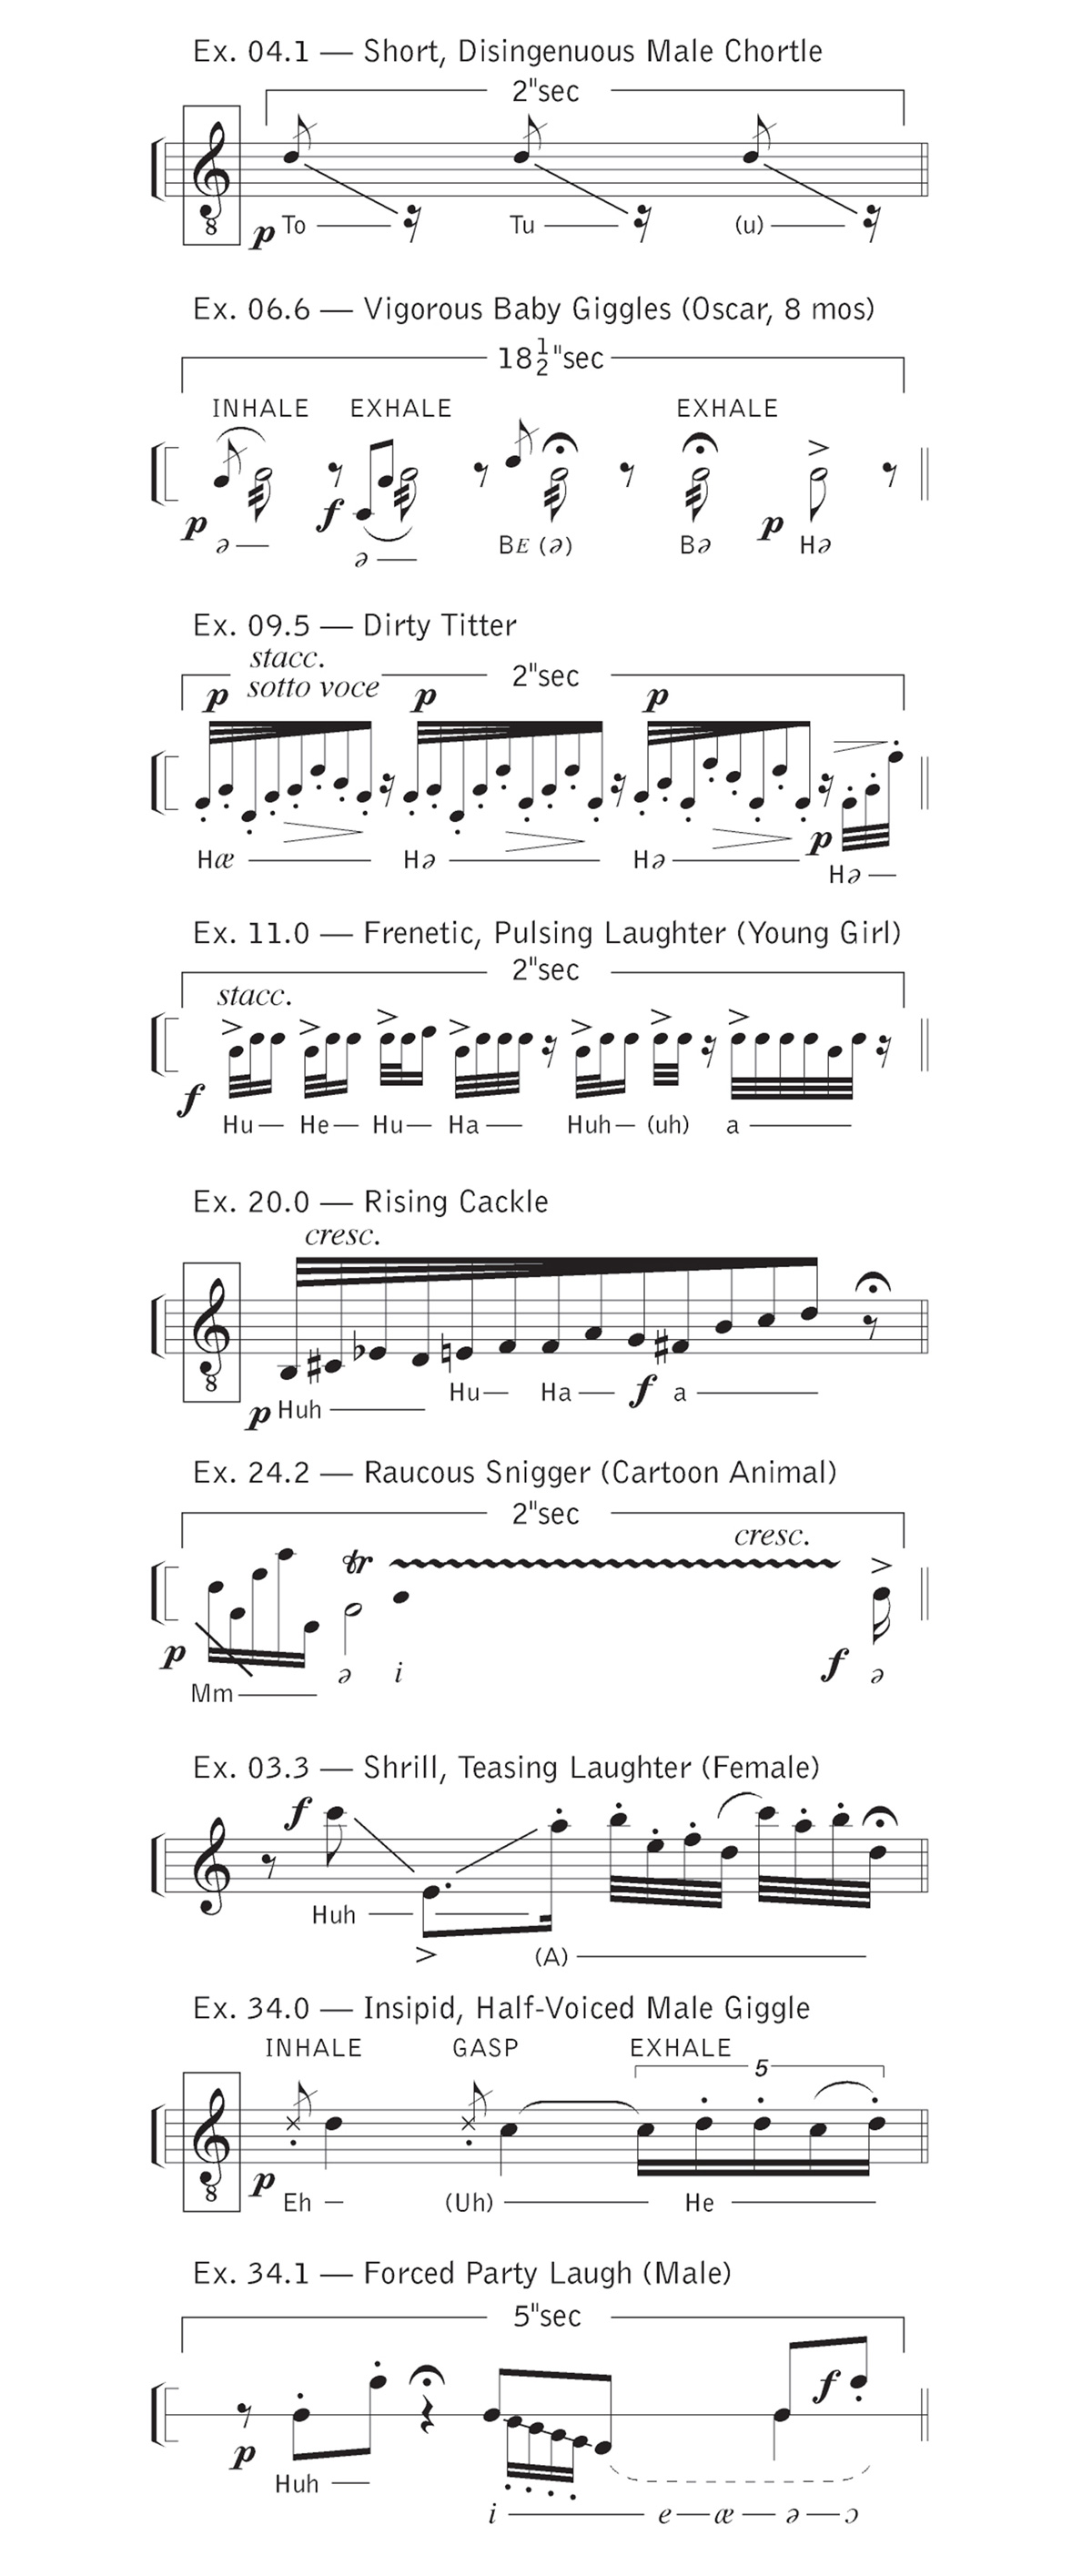 Edward Jessen’s 2005 laughter score titled “Dirty titter, raucous snigger.” Using his notation, one can perform a “Short, Disingenuous Male Chortle” or “Frenetic, Pulsing Laughter (Young Girl),” among other forms of laughter. 